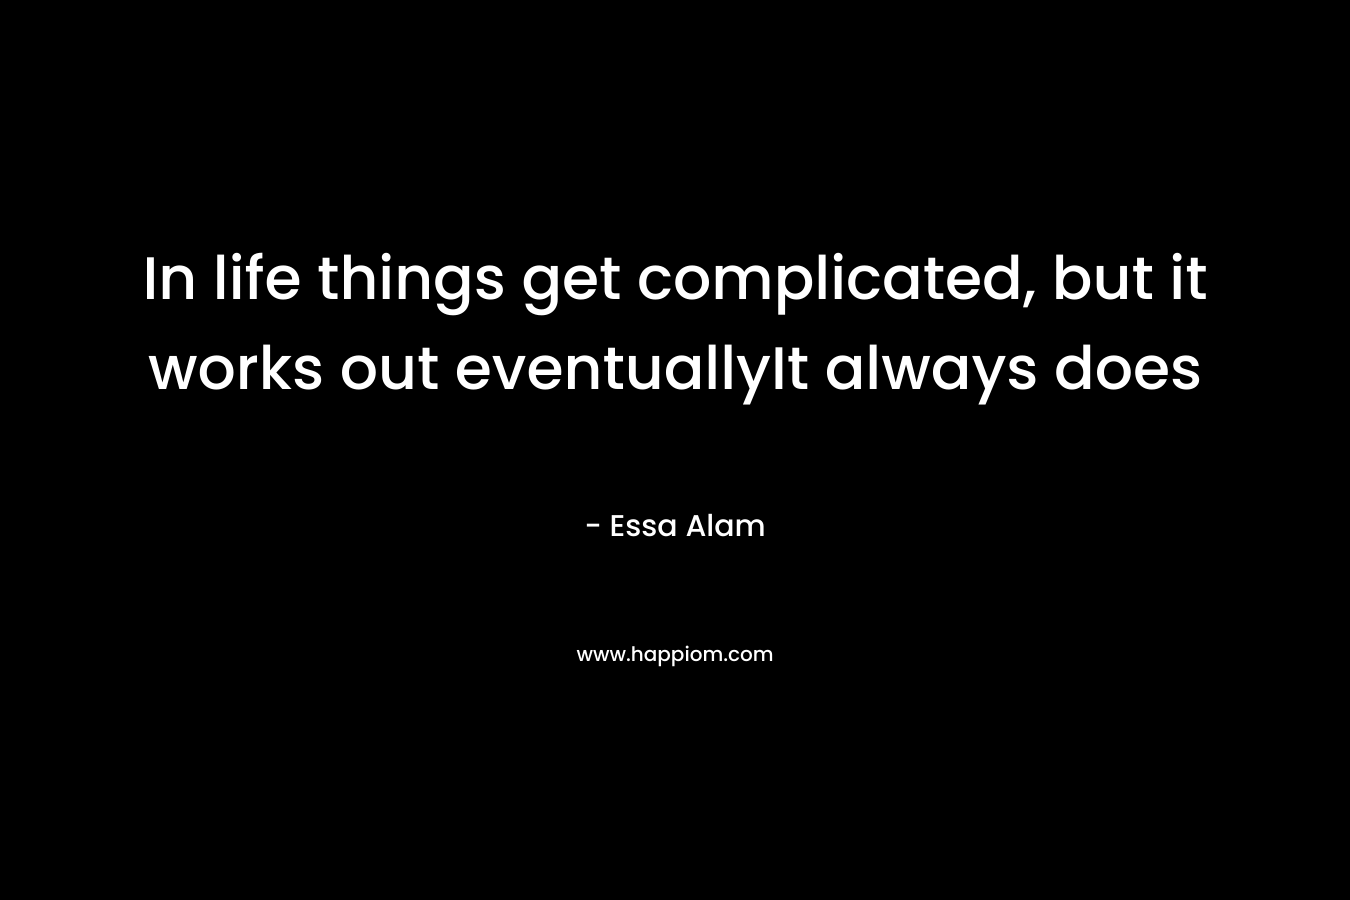 In life things get complicated, but it works out eventuallyIt always does